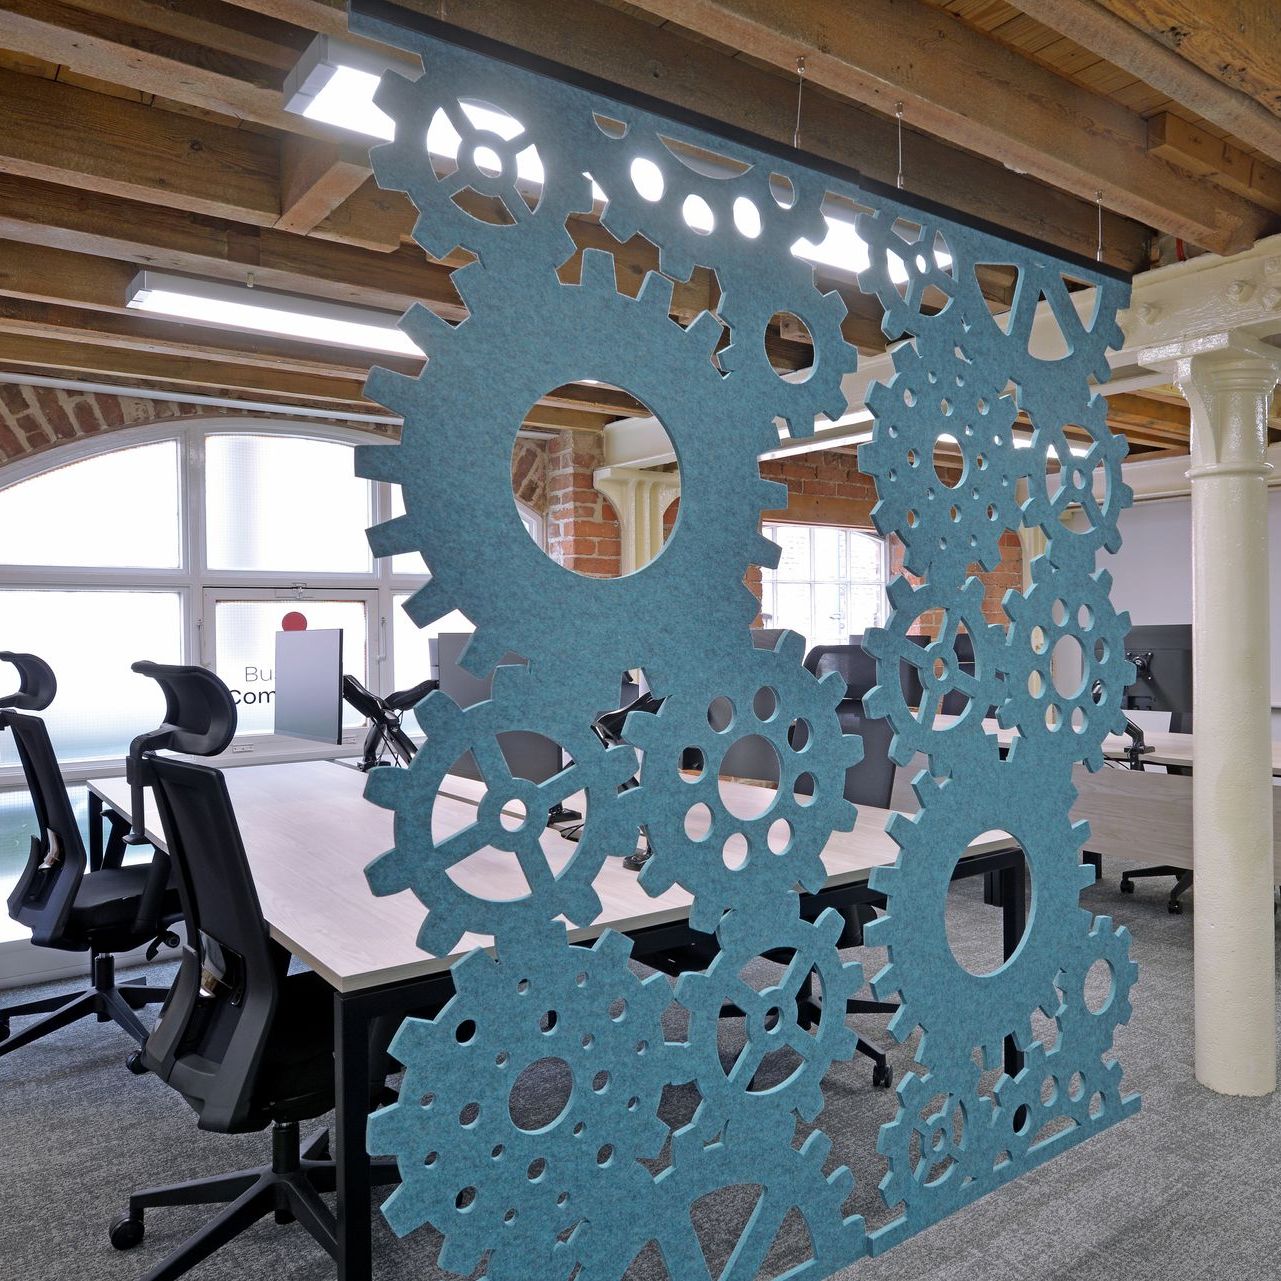 meeting space with branded wall of cogs